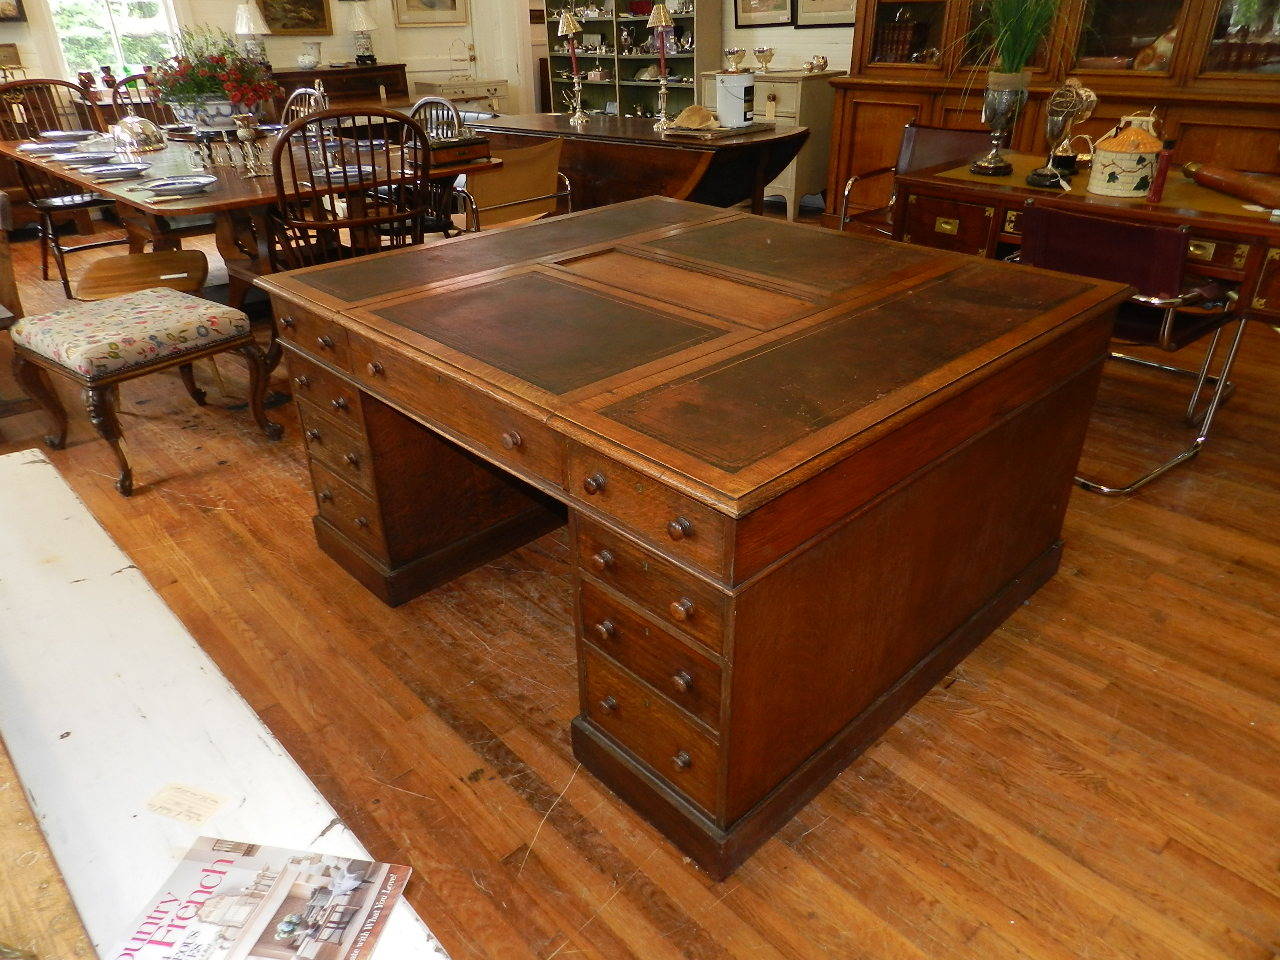 Oak twin pedestal partners desk with original  tooled leather top. All drawers are dovetailed and have the original knobs. The upper section has a pair of lidded compartments.The original leather top has some wear and patina which enhance the